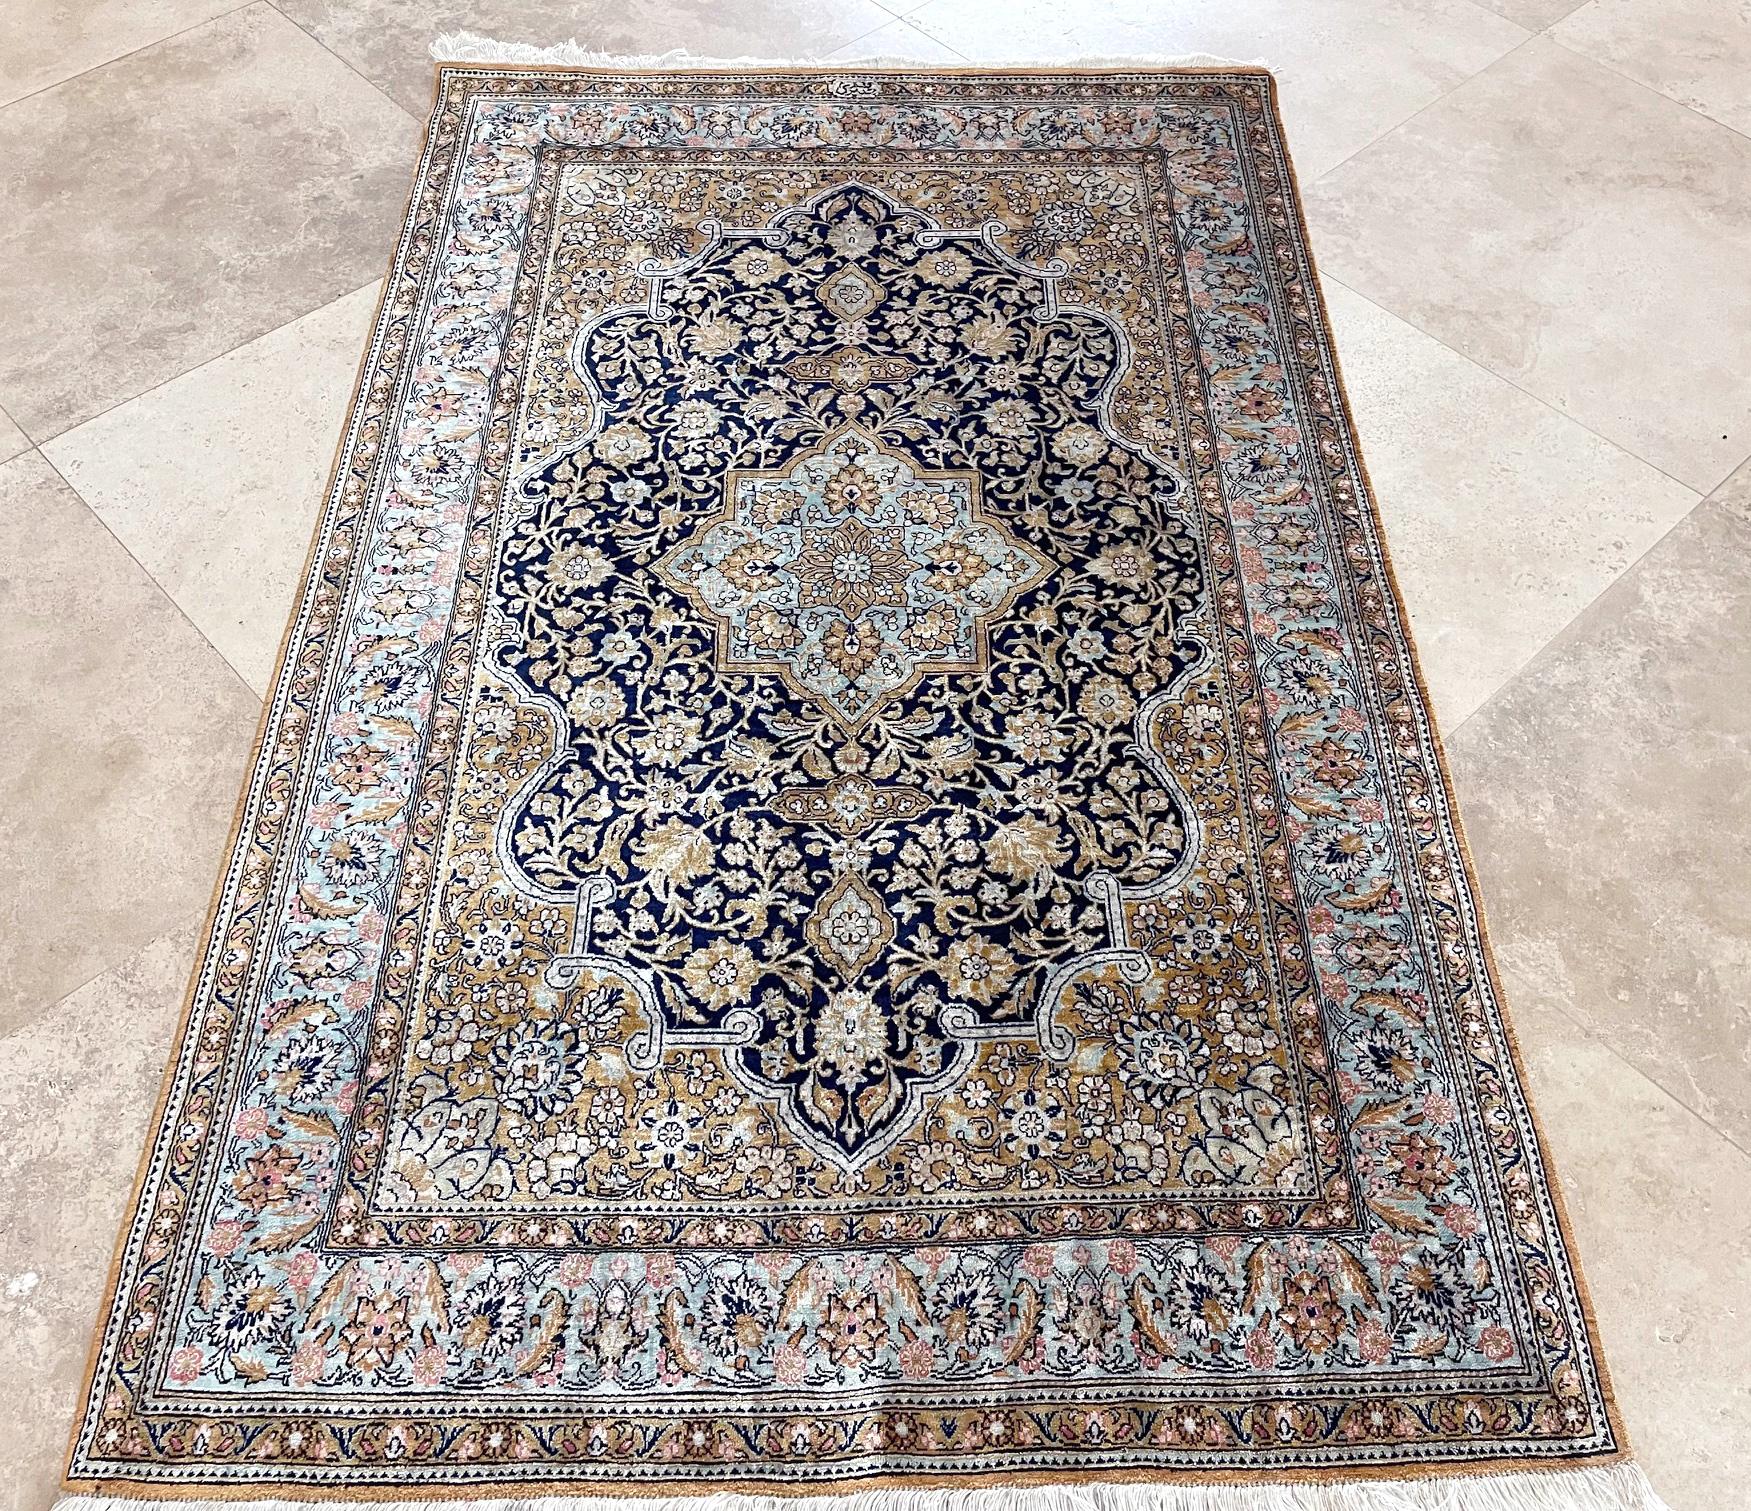 This is a very fine rug weaved in city of Qum, Iran. This rug has silk pile and foundation, with a stunning design and color combination woven onto a dark blue background with a turquoise border. The design in this piece is a medallion semi floral